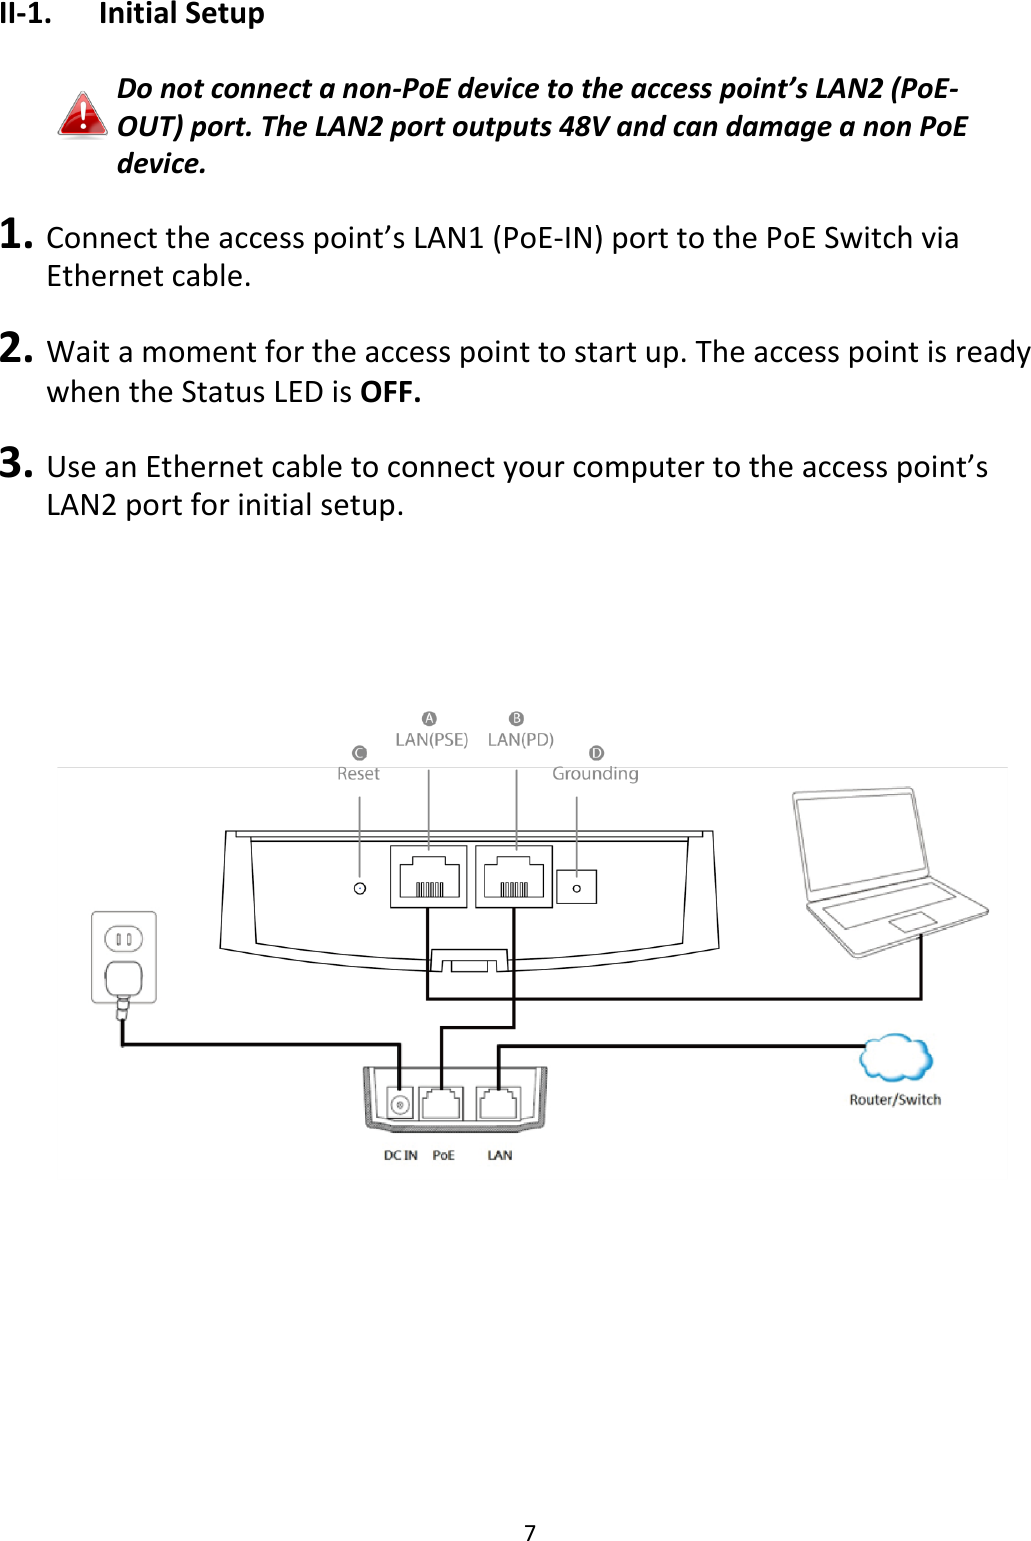 7  II-1.  Initial Setup  Do not connect a non-PoE device to the access point’s LAN2 (PoE- OUT) port. The LAN2 port outputs 48V and can damage a non PoE device.  1. Connect the access point’s LAN1 (PoE-IN) port to the PoE Switch via Ethernet cable.  2. Wait a moment for the access point to start up. The access point is ready when the Status LED is OFF.  3. Use an Ethernet cable to connect your computer to the access point’s LAN2 port for initial setup.        